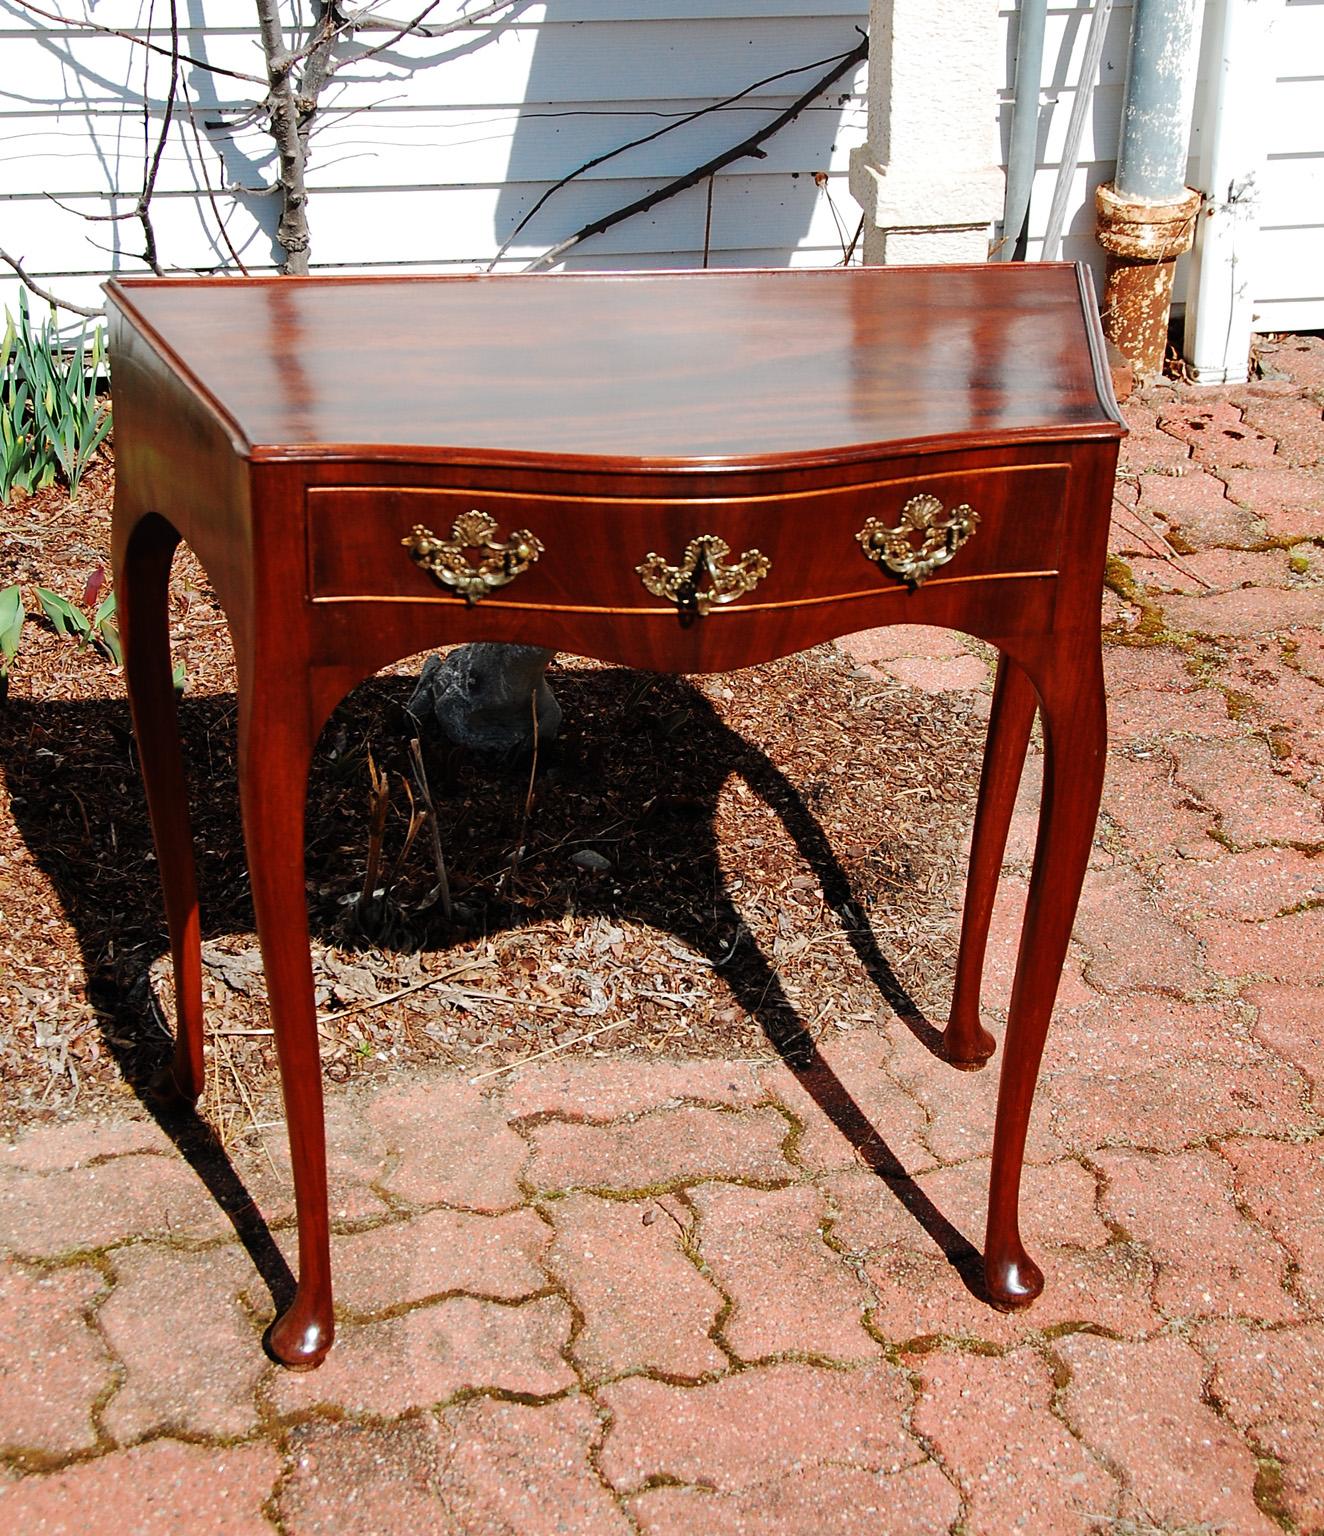 Dutch late 18th century serpentine mahogany side table with cabriole legs, pad feet and bead gallery. The single serpentine drawer and shaped skirt to sides as well as the front gives this elegant table gravitas. It is in wonderful proportions and